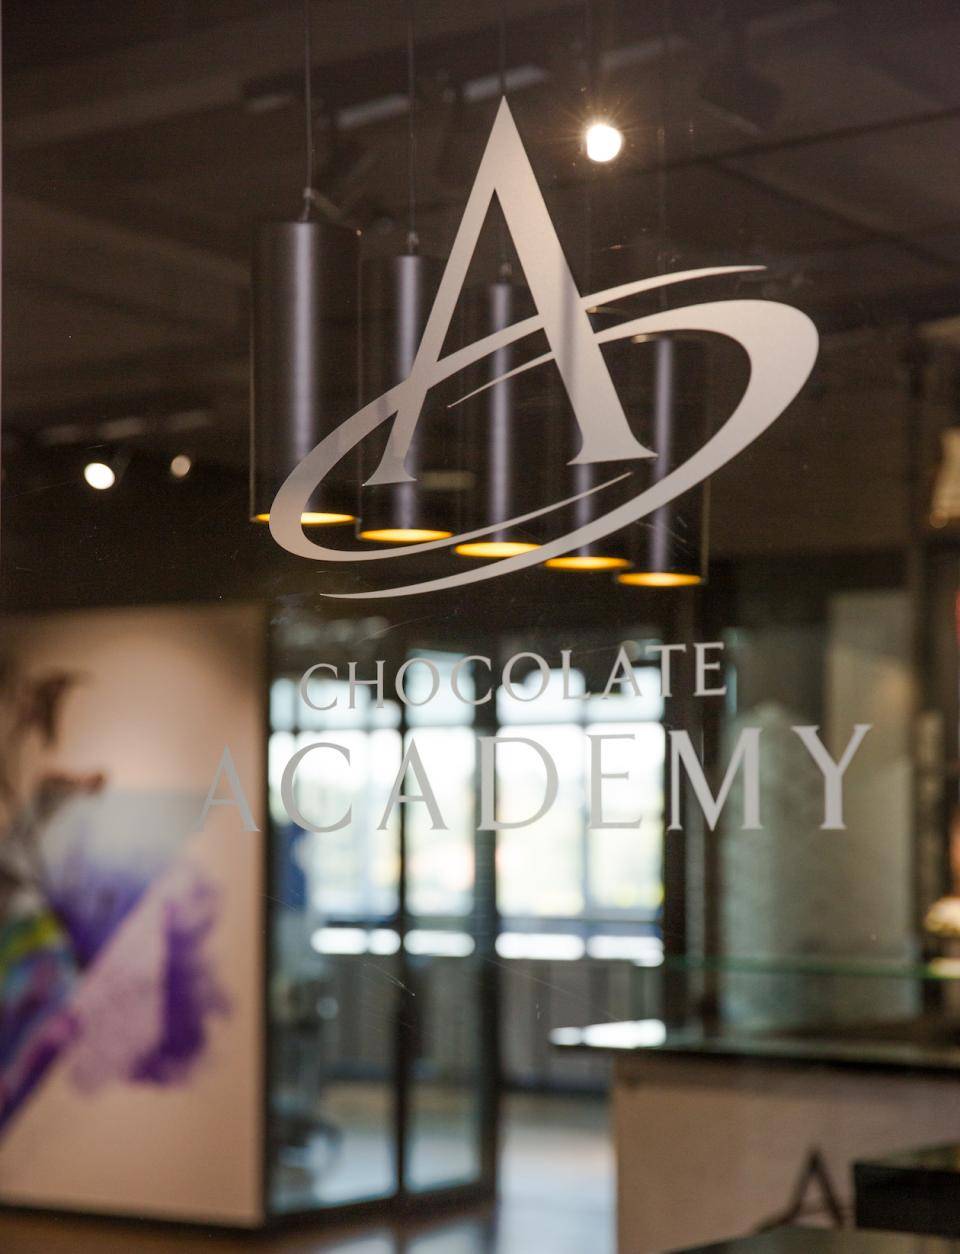 The entrance of CA South Africa, with the Chocolate Academy logo etched on the glass